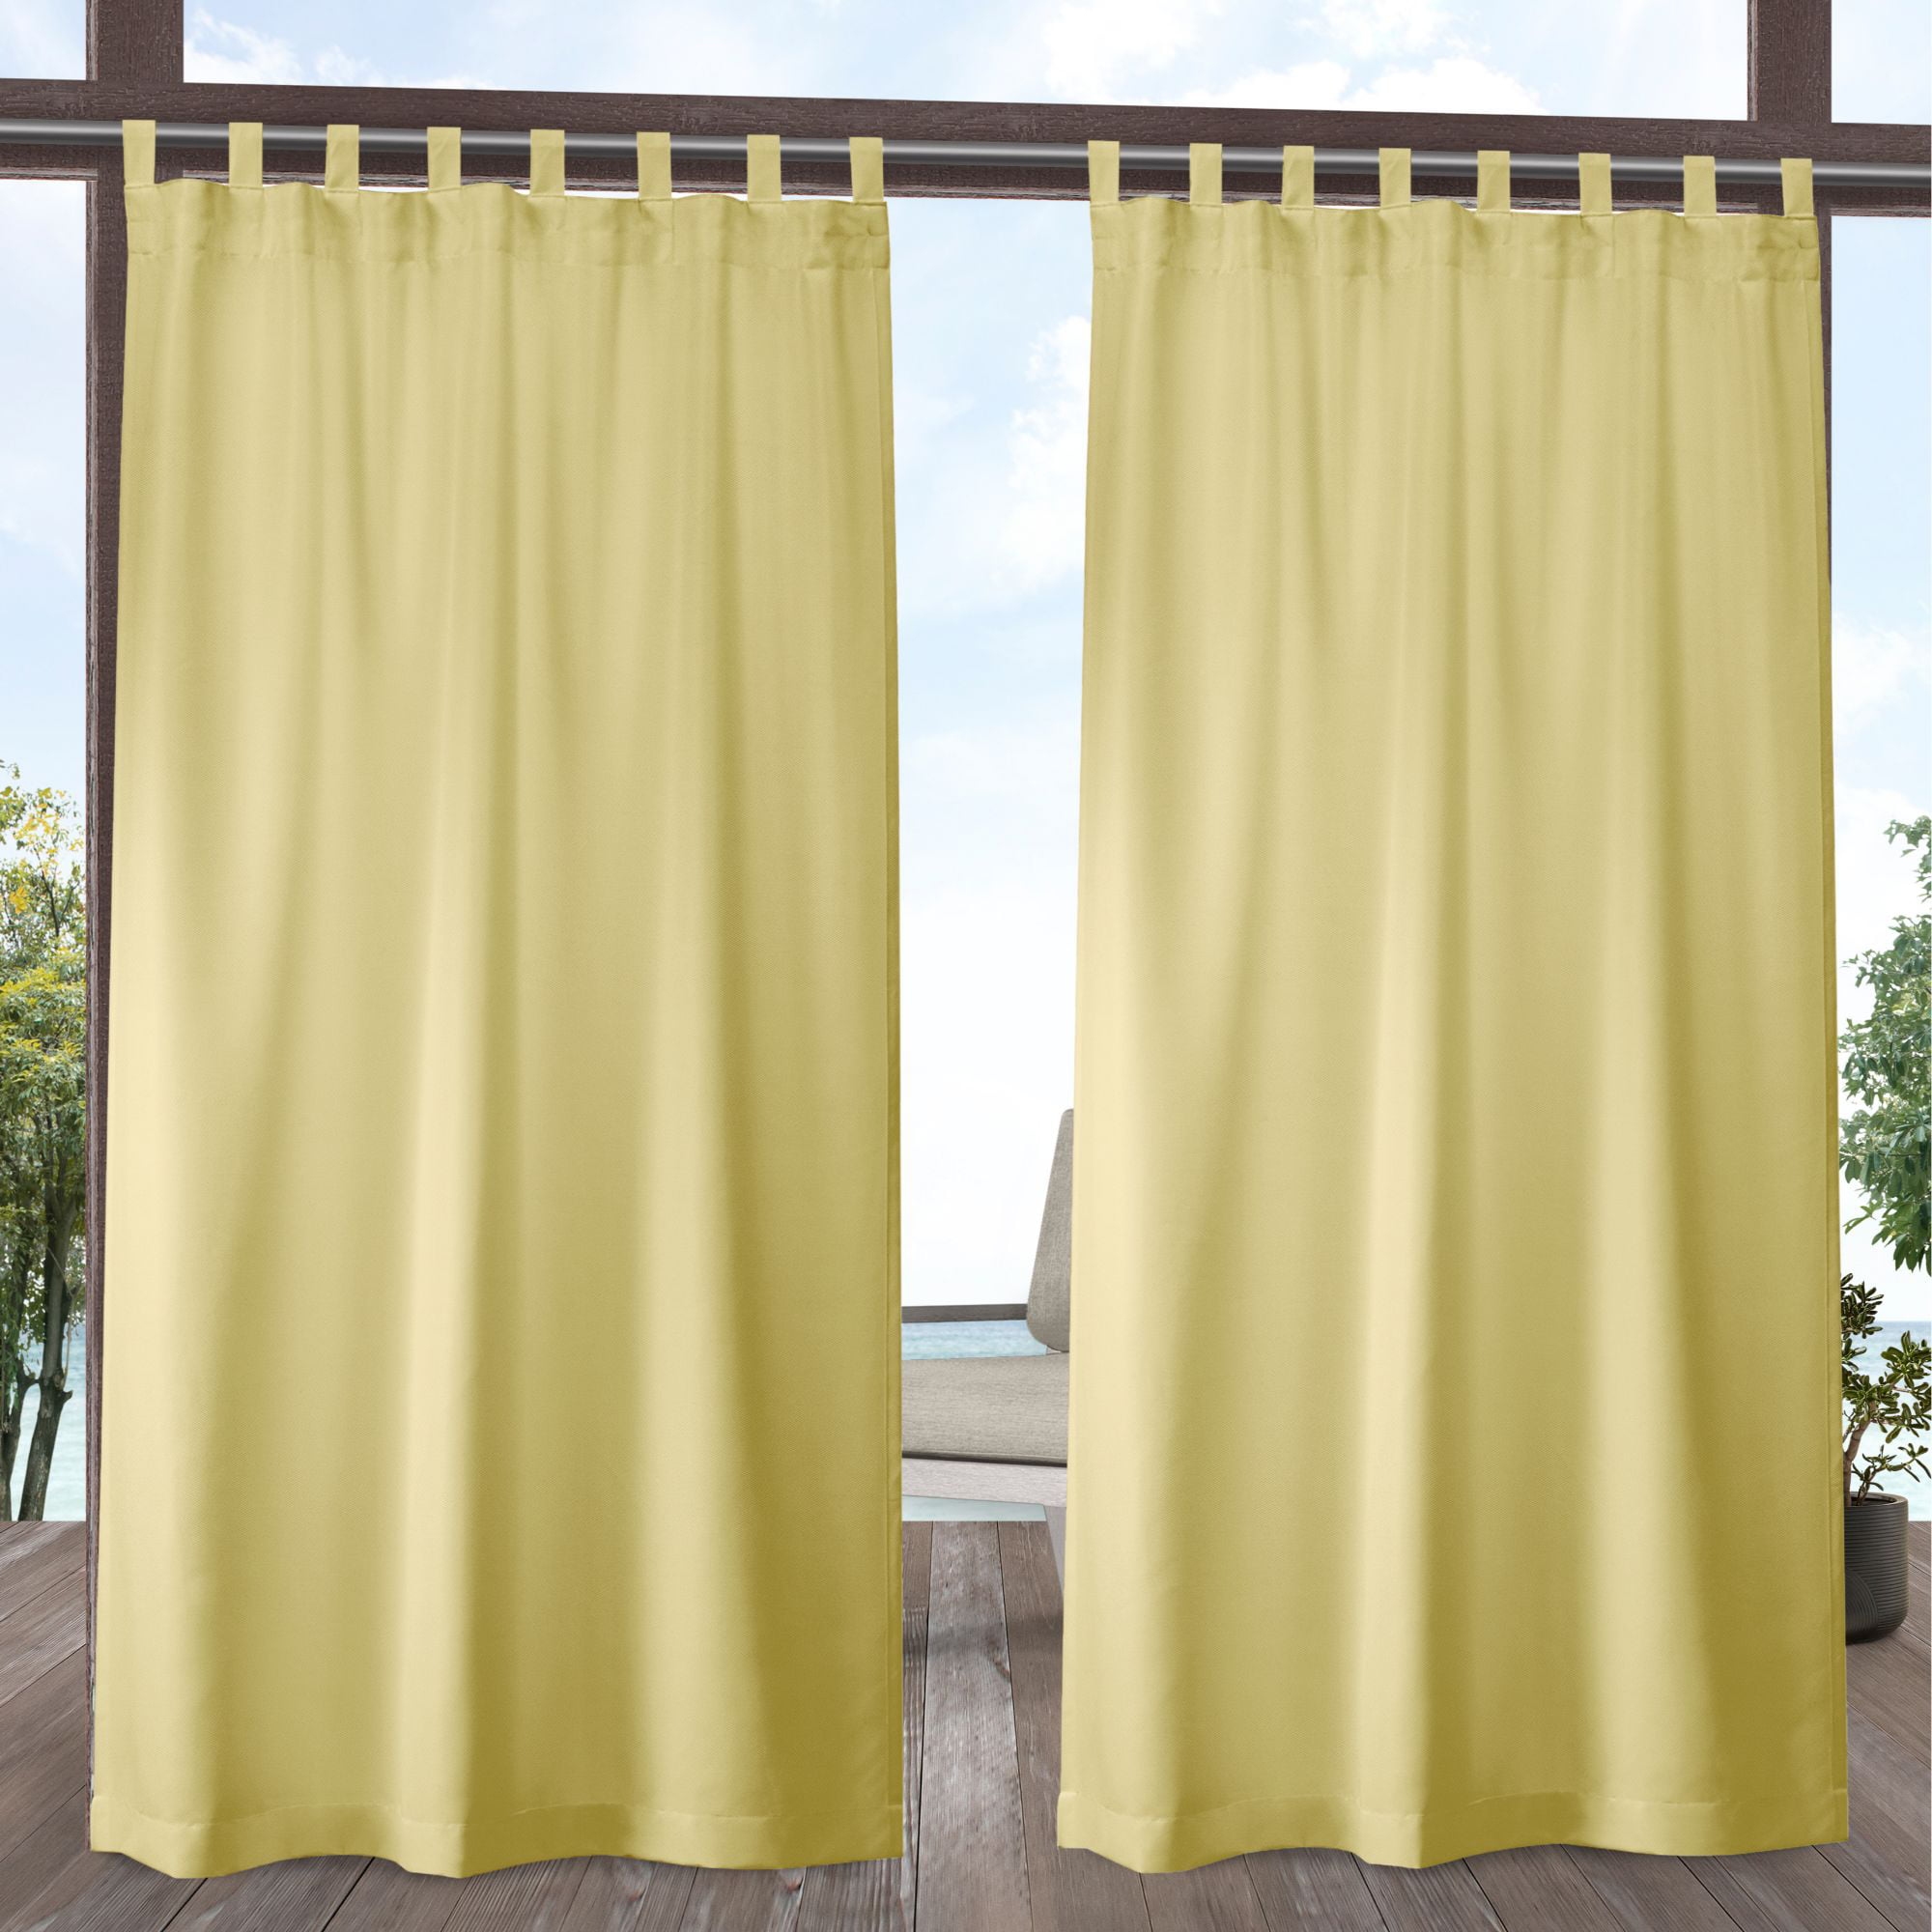 Exclusive Home Curtains Indoor/Outdoor Cabana Window Curtain Panels Taupe 54x96" 